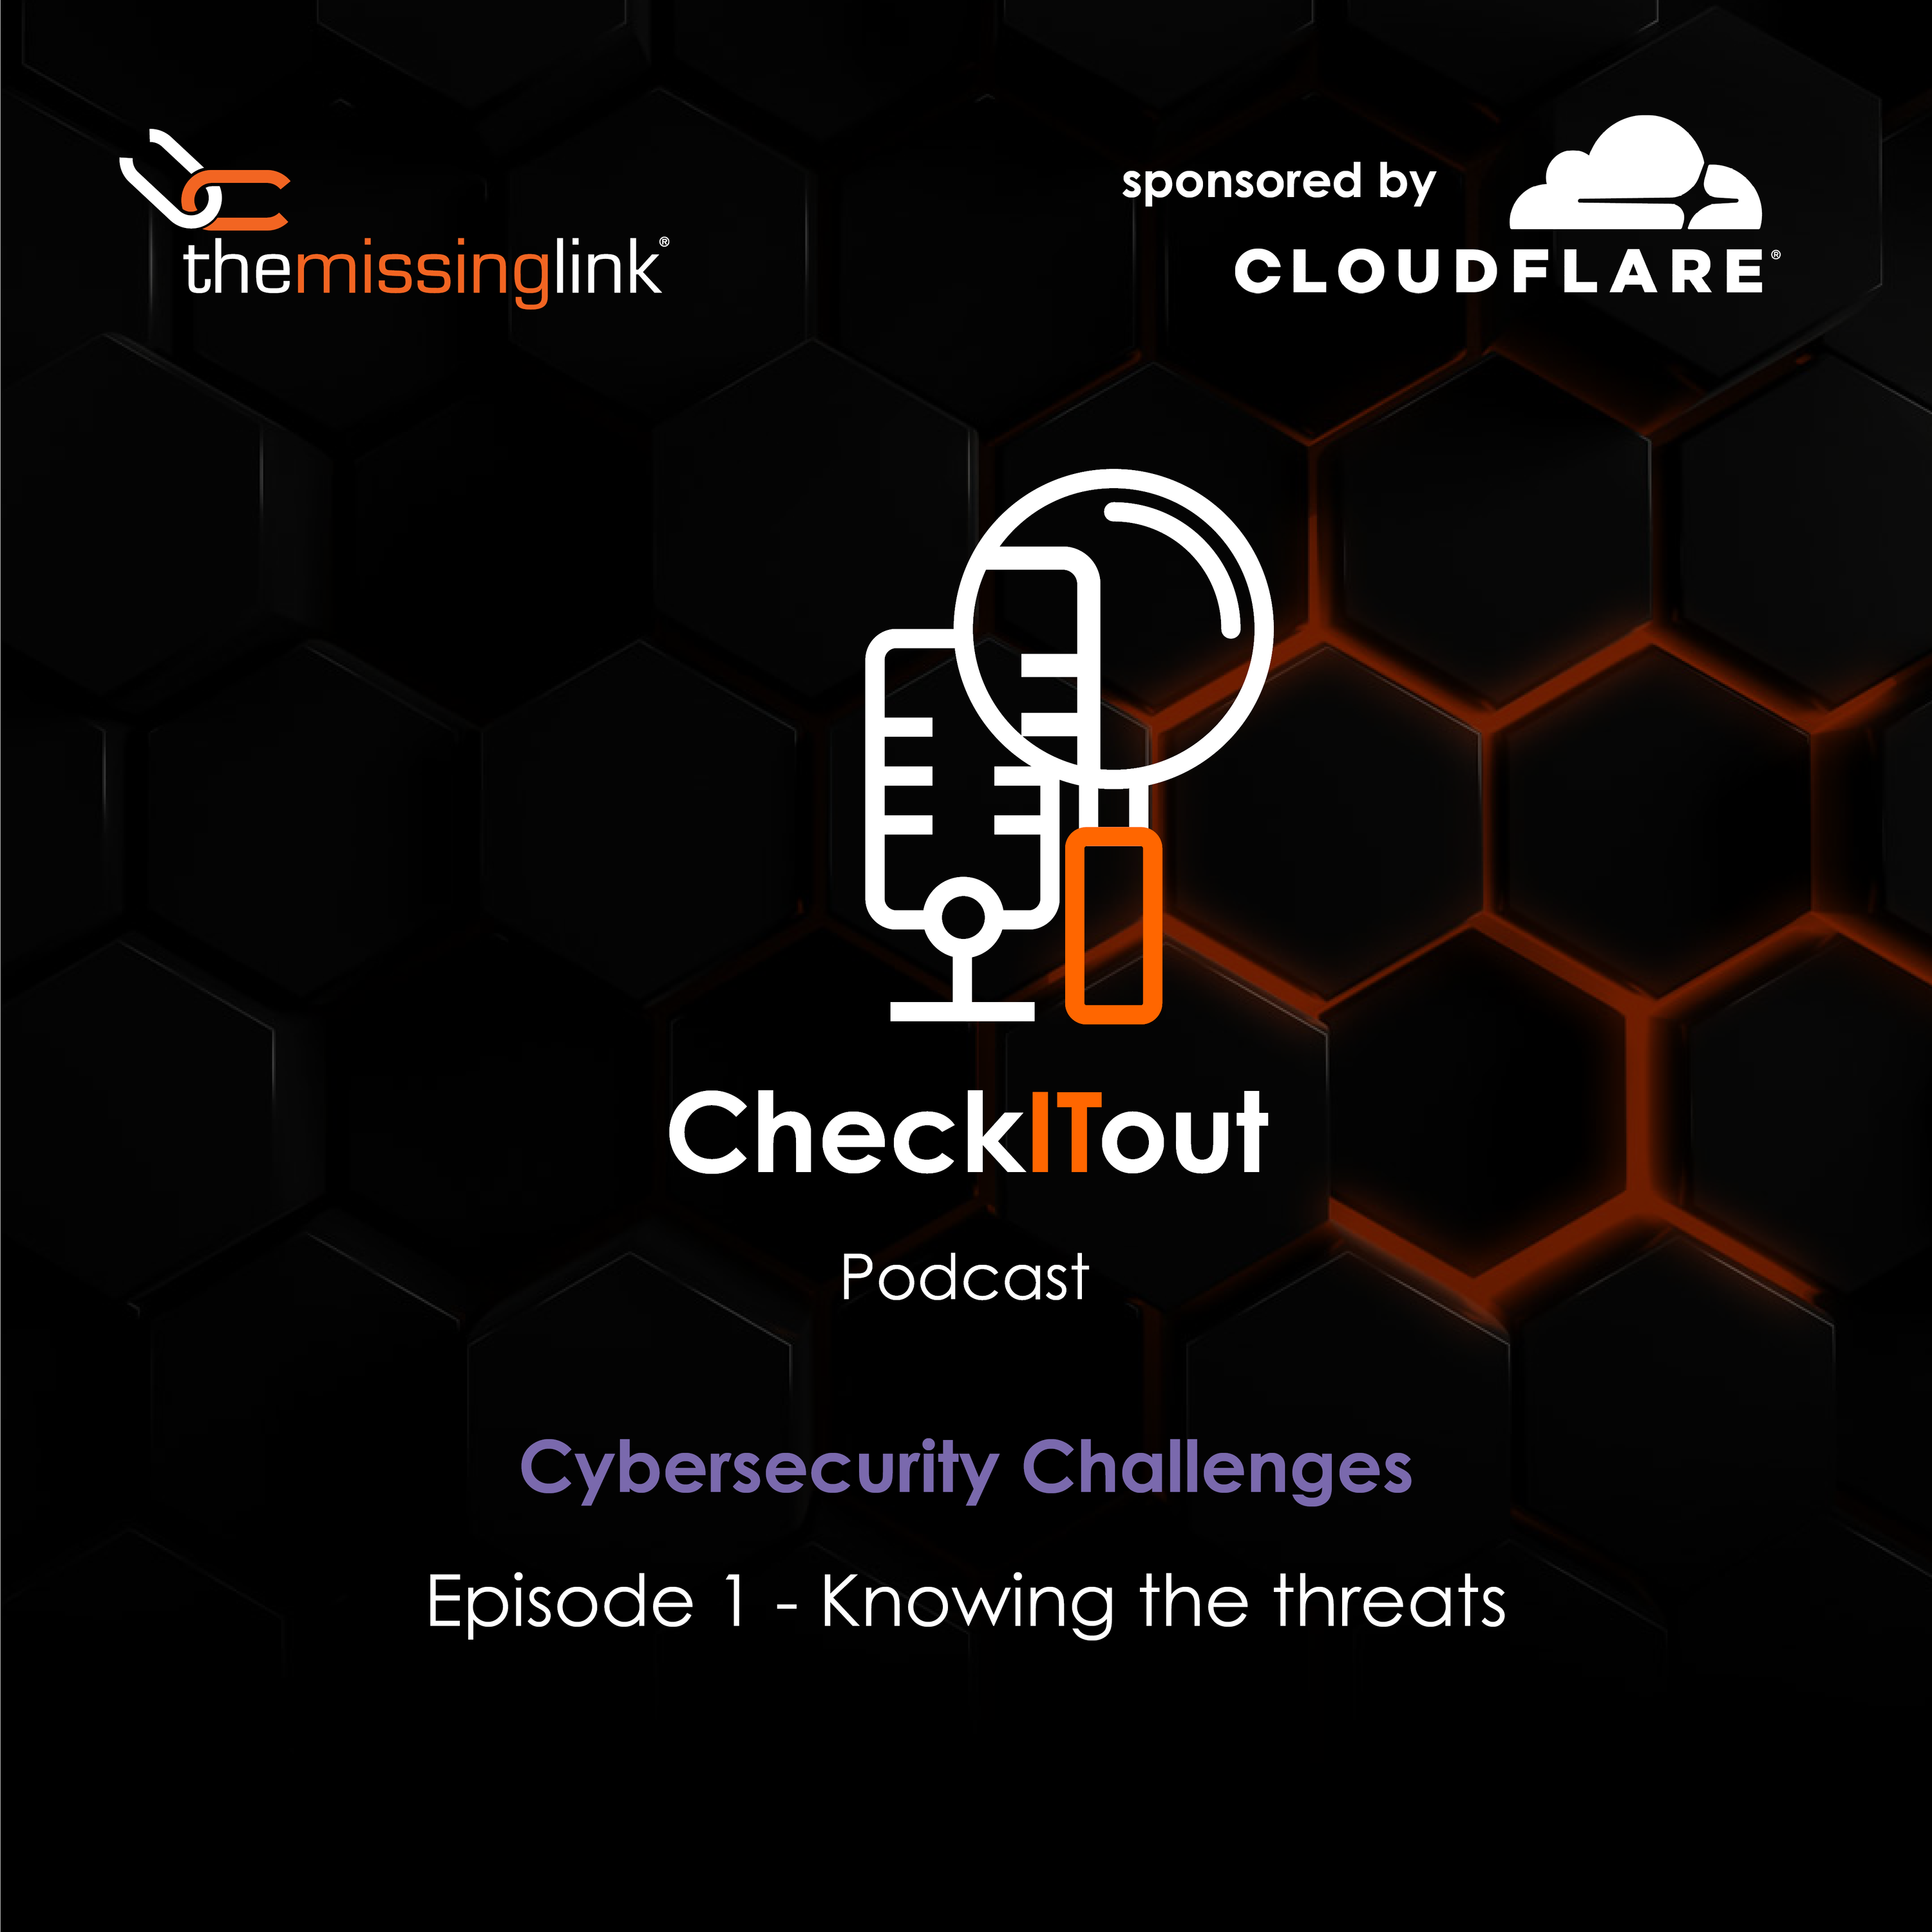 Cybersecurity Challenges - Knowing the threats